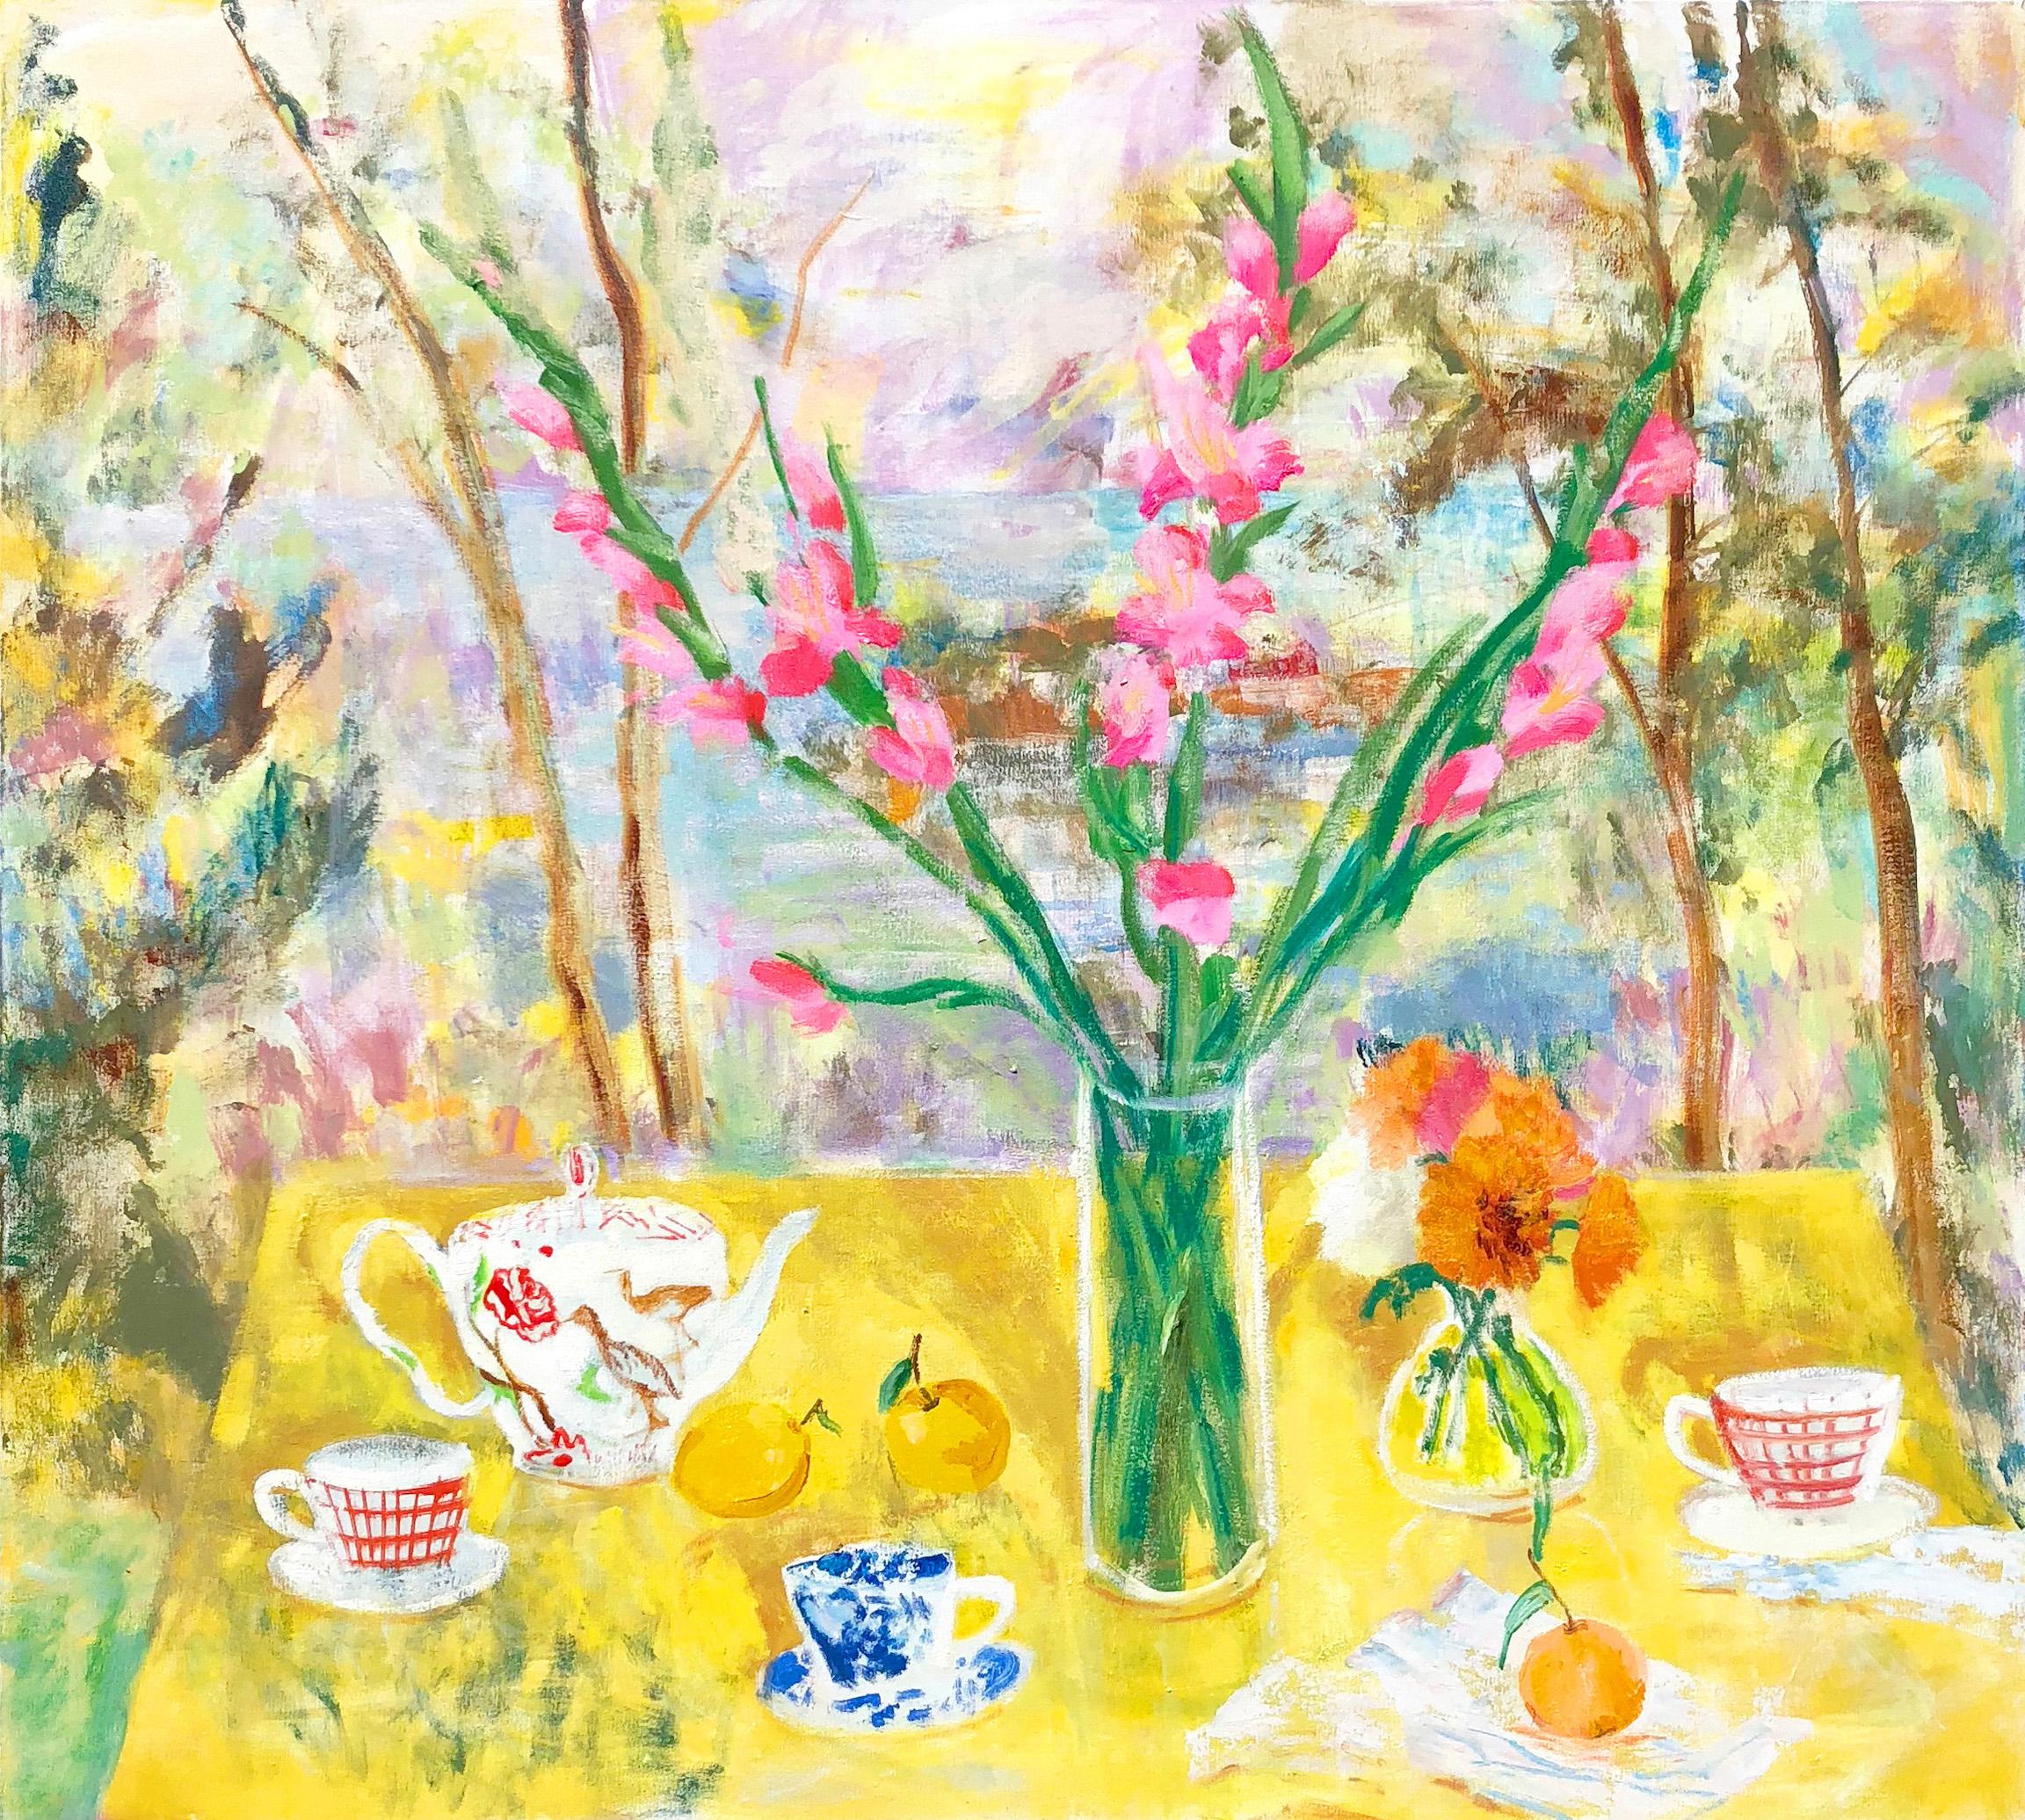 Melanie Parke Still-Life Painting - The Philosophy of Tea, Teacups, Yellow, Pink Gladiolus Flowers, Green Forest